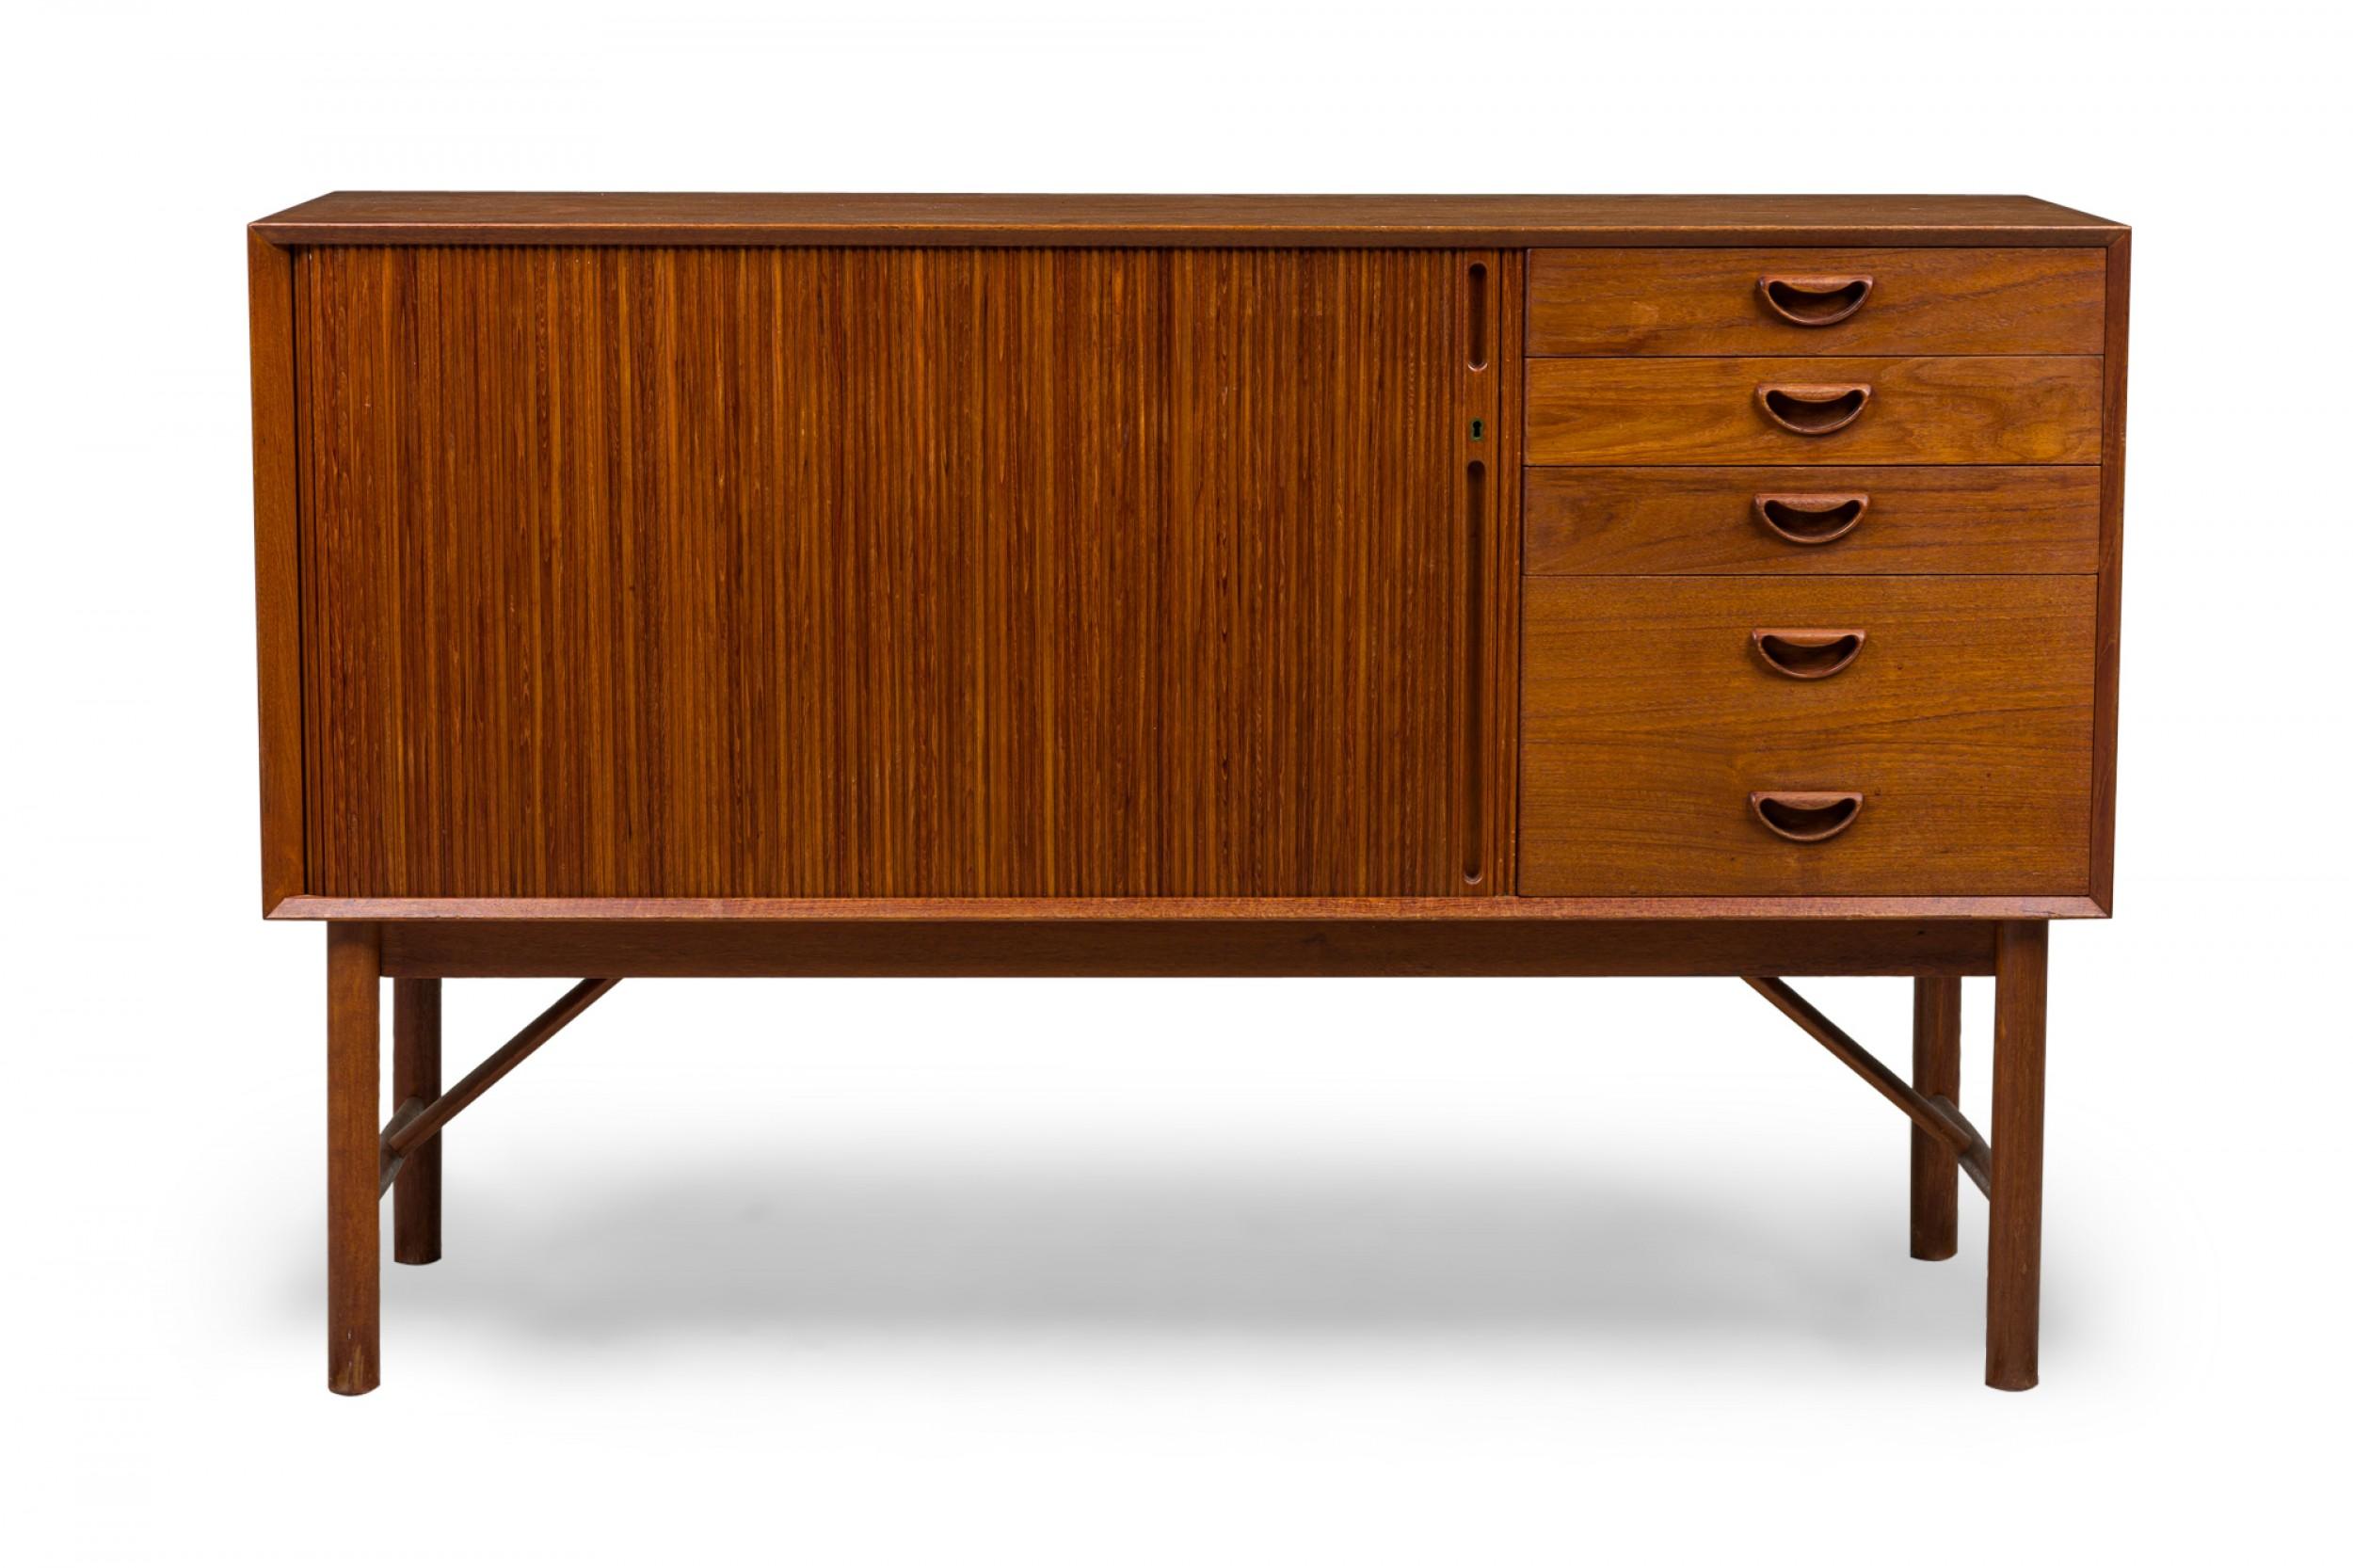 Midcentury Danish teak cabinet with 4 pullout drawers, sculpted pulls and sliding tambour door revealing a two-shelf compartment. (Peter Hvidt FOR Søborg Møbler)(Similar piece: DUF0891).